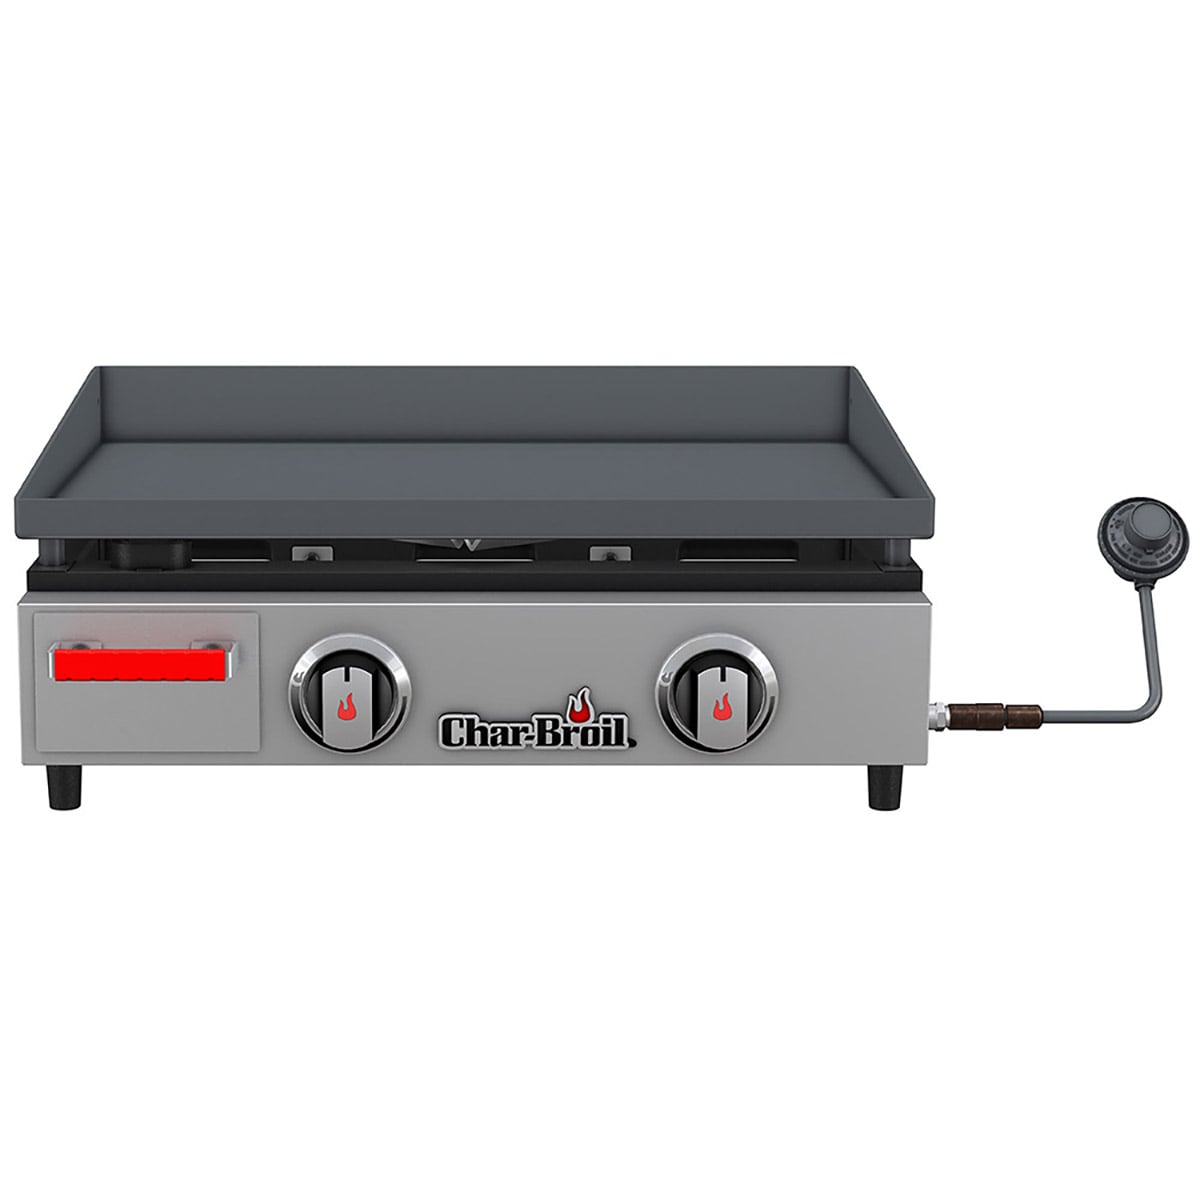 Stove Top Flat Griddle2 Burner Griddle Grill Pan for Glass Stove